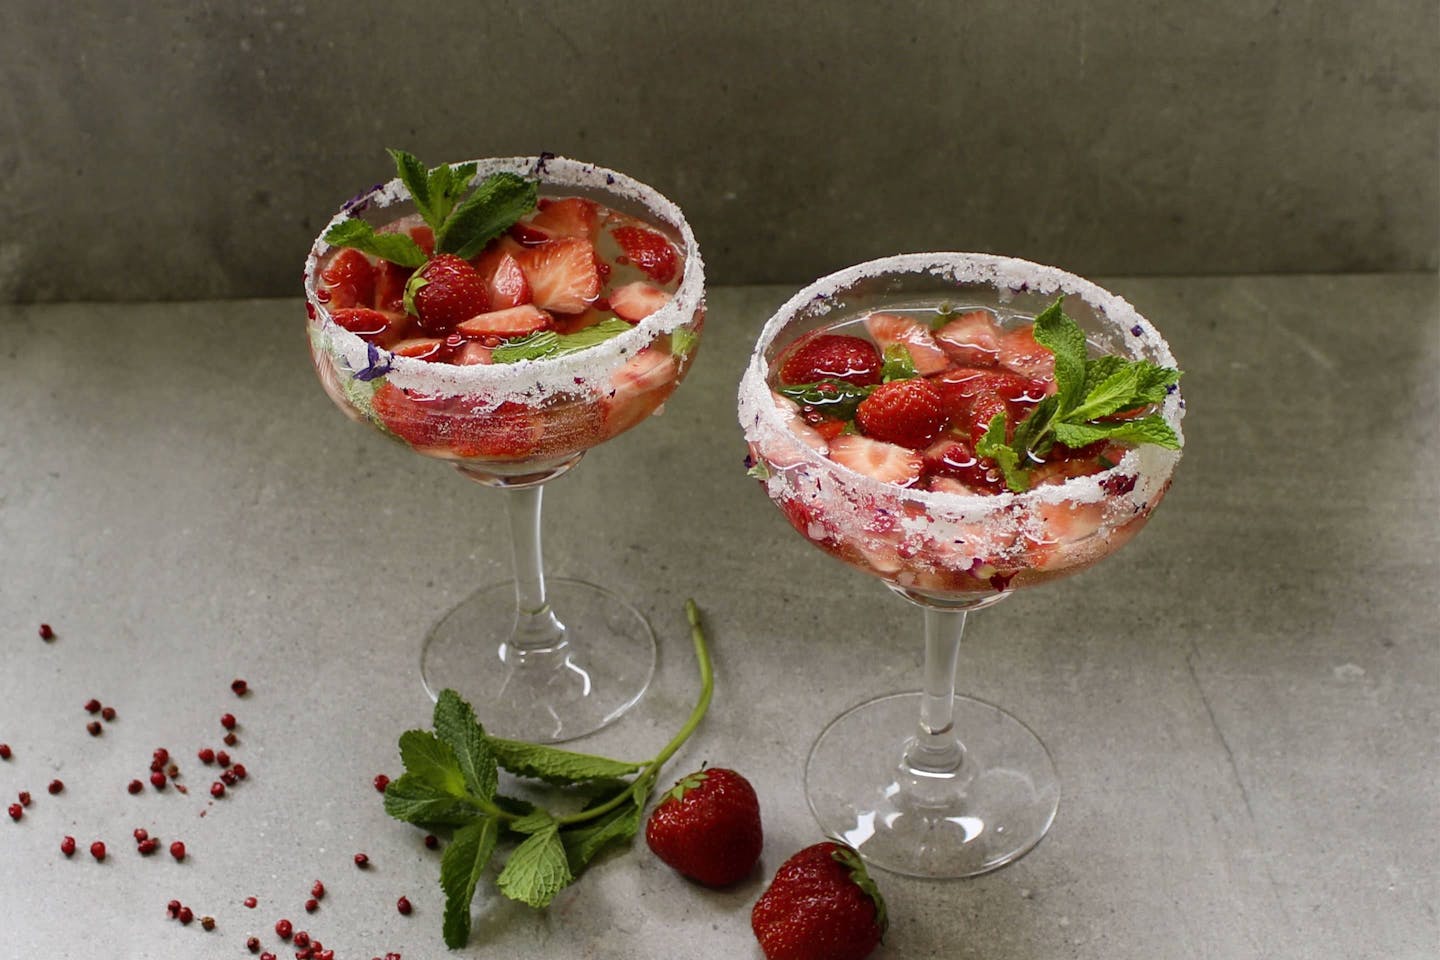 Summer punch with pink berries and fresh strawberry pieces in sugar-coated cocktail glasses, garnished with fresh mint